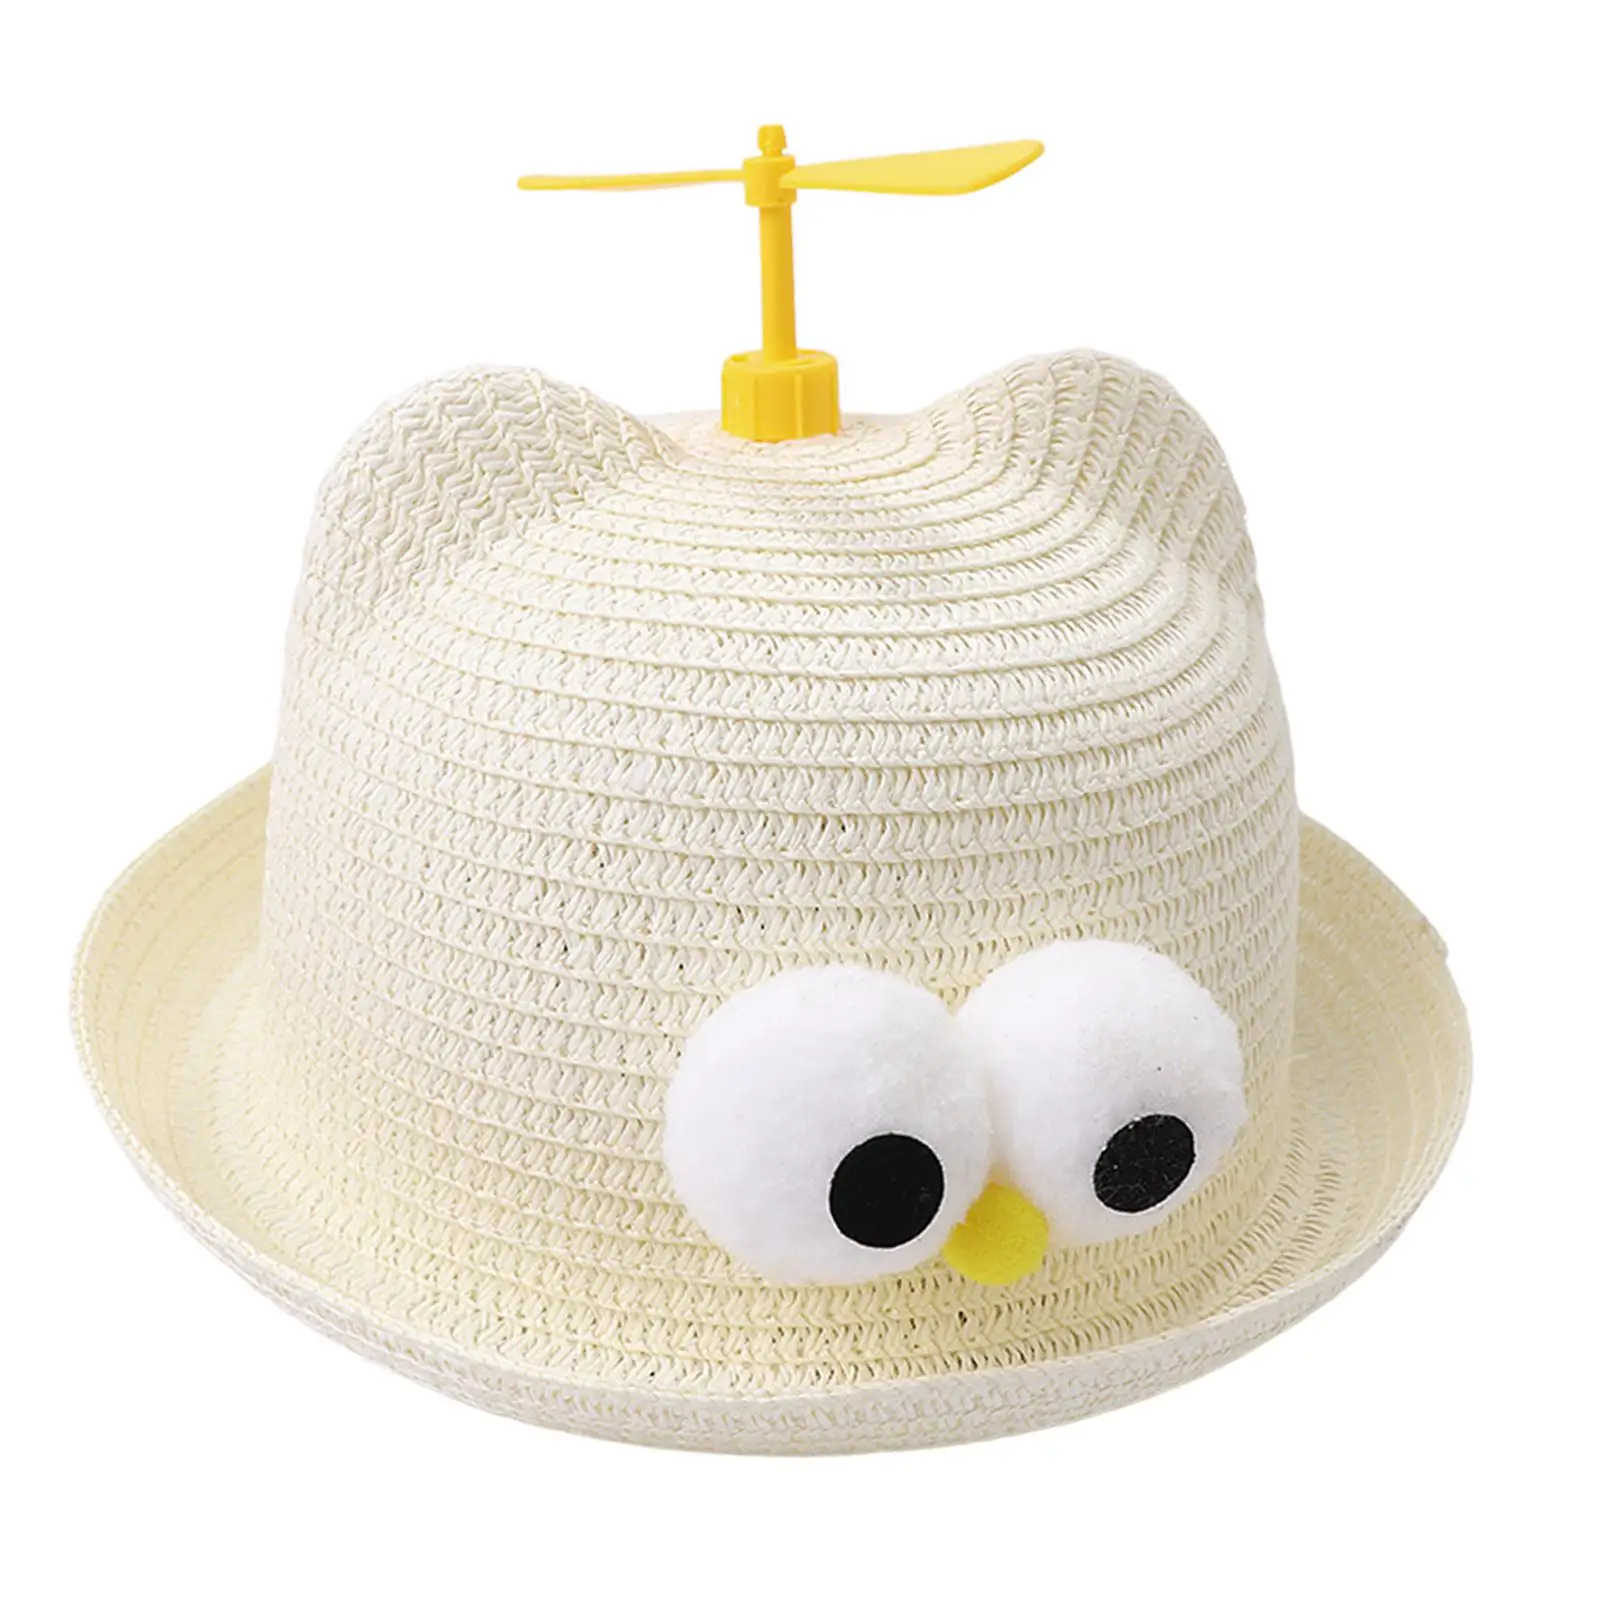 Kids Sun Hat for Girls Boys Breathable Sun Protection Portable Straw Hat Fisherman Cap for Outdoor Sightseeing Short Trips